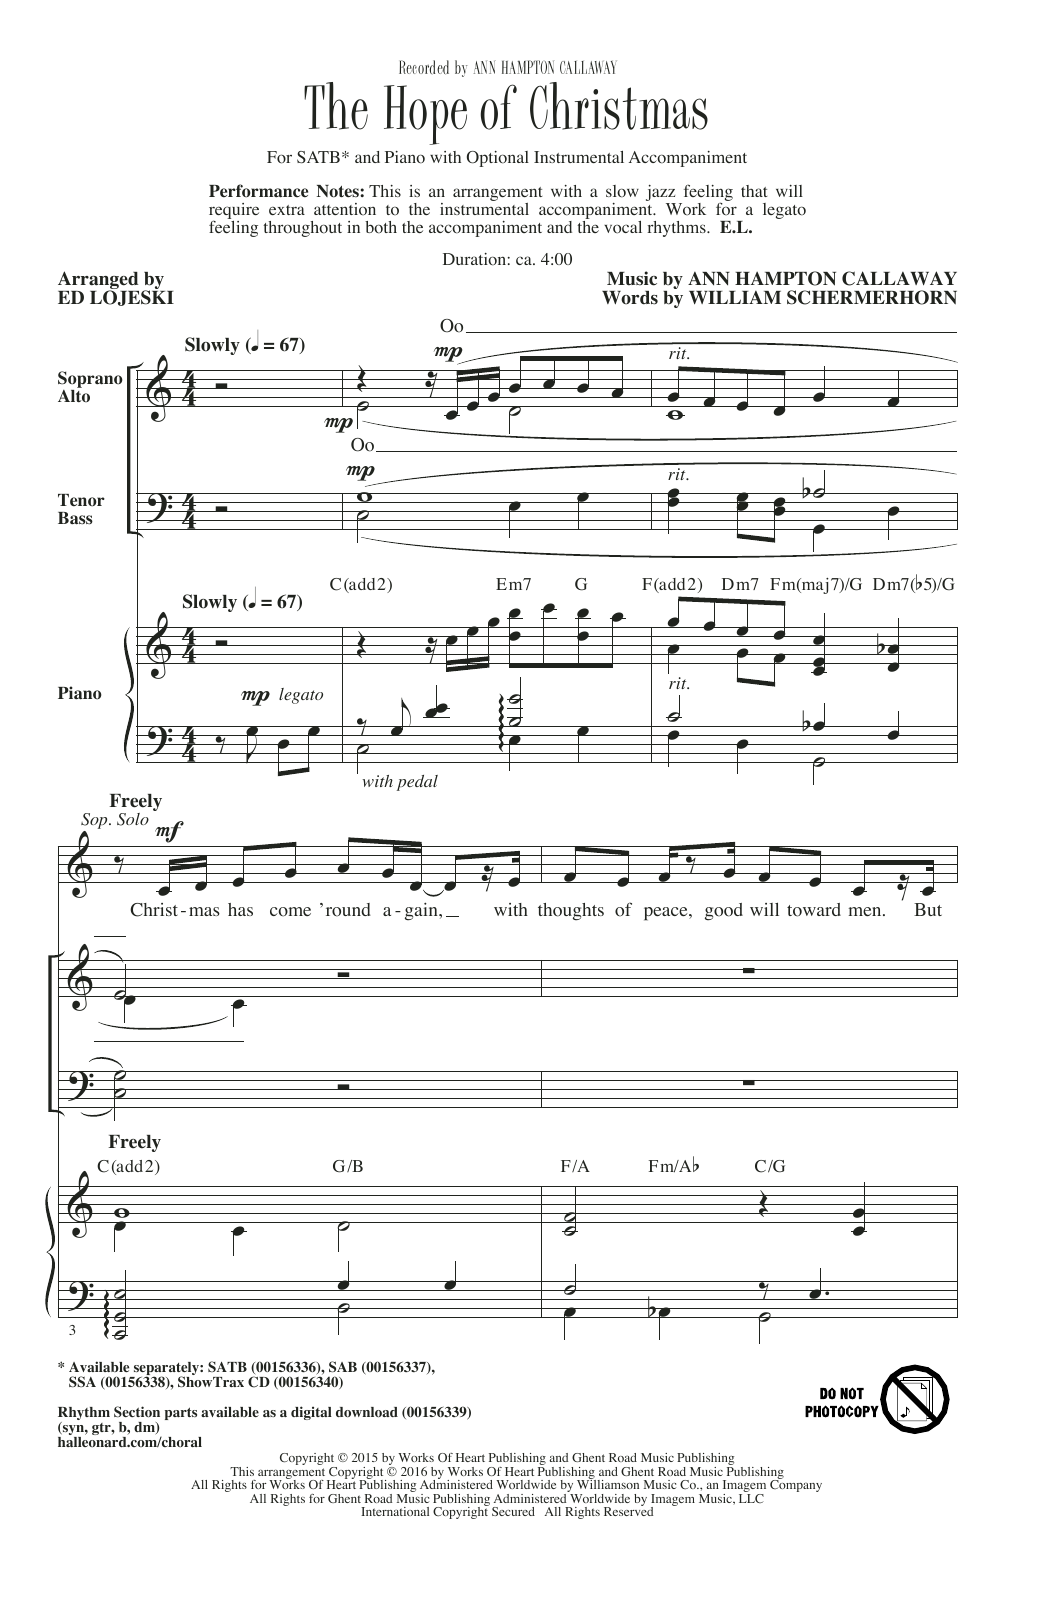 Ed Lojeski The Hope Of Christmas sheet music notes and chords. Download Printable PDF.